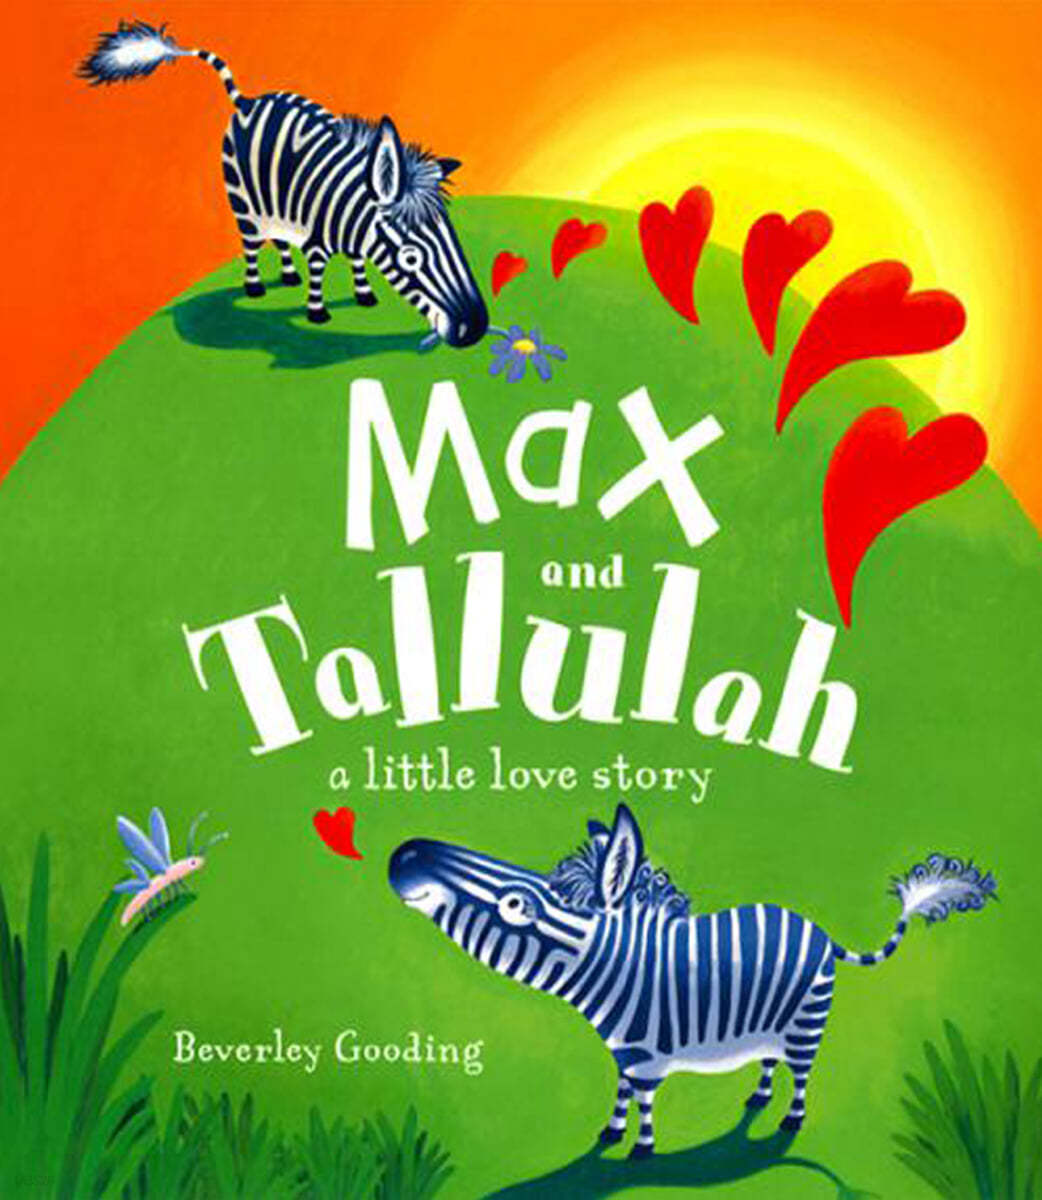 Max and tallulah : A little love story